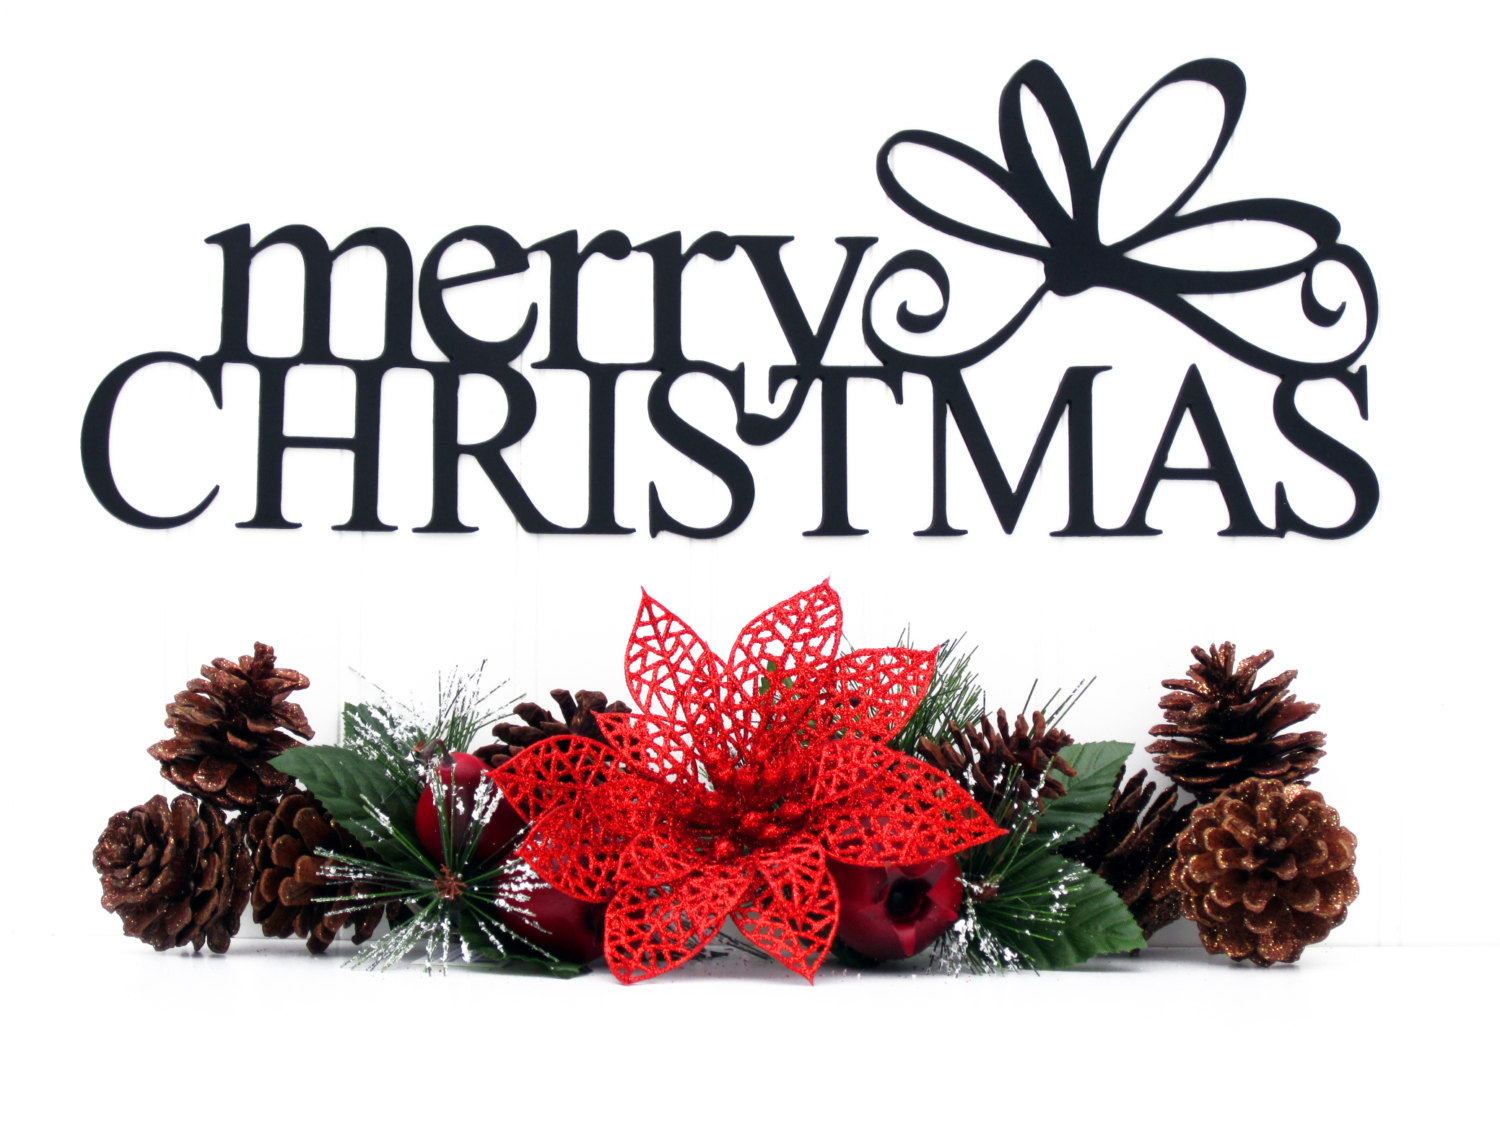 Merry Christmas Metal Sign with Bow Black by RefinedInspirations